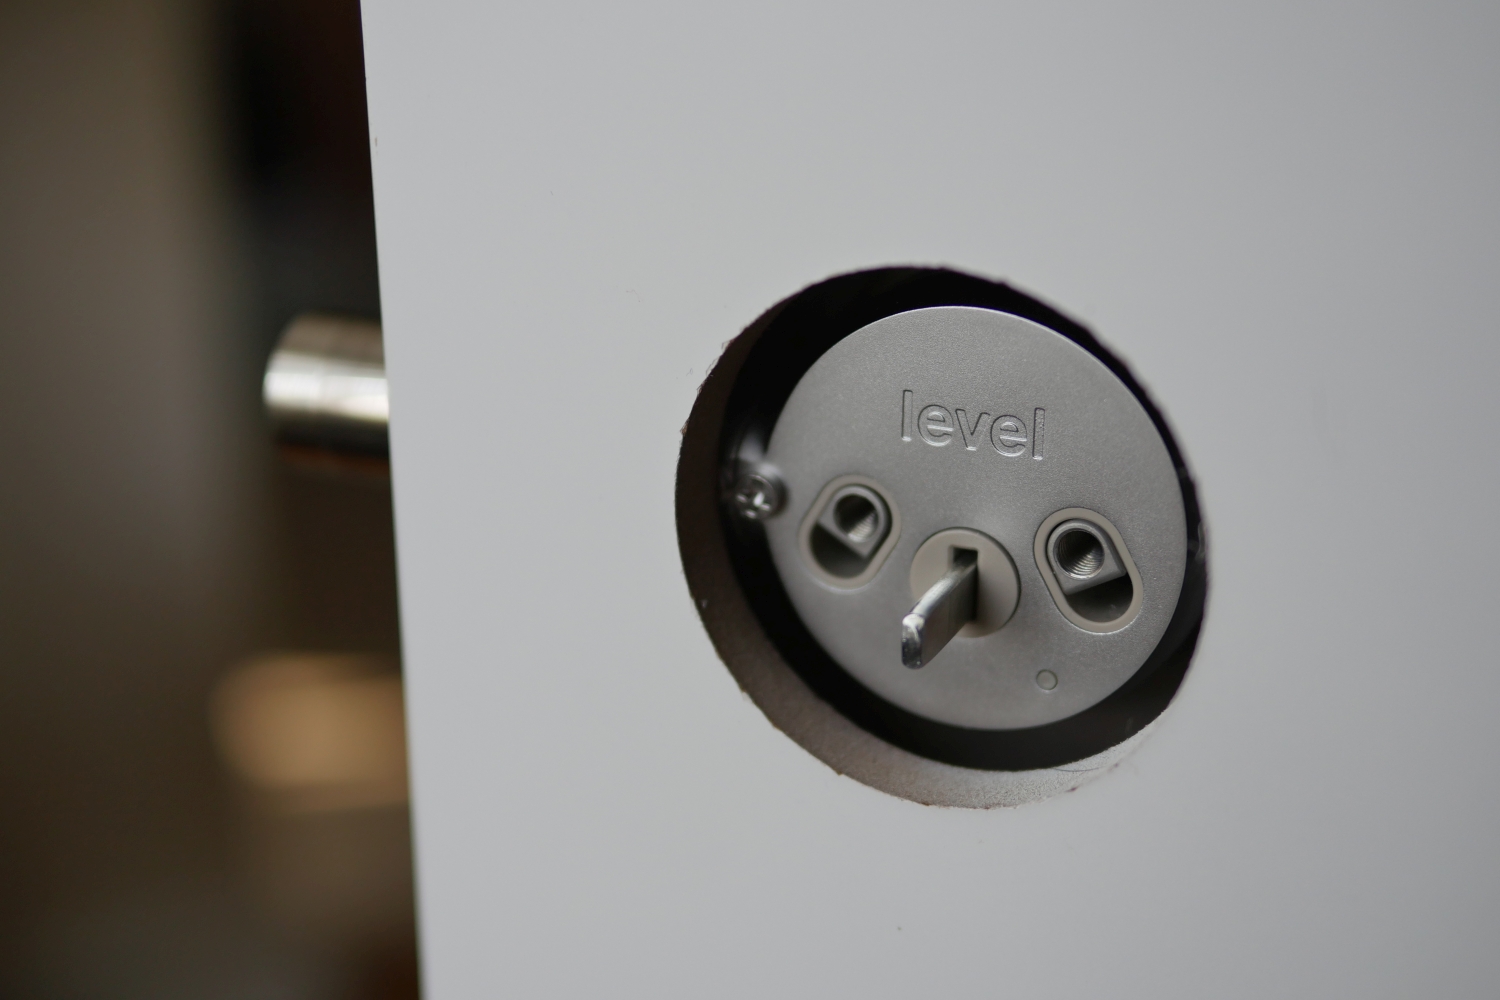 Level Lock Review: A Continuation of Smart Meeting Beauty | Digital Trends